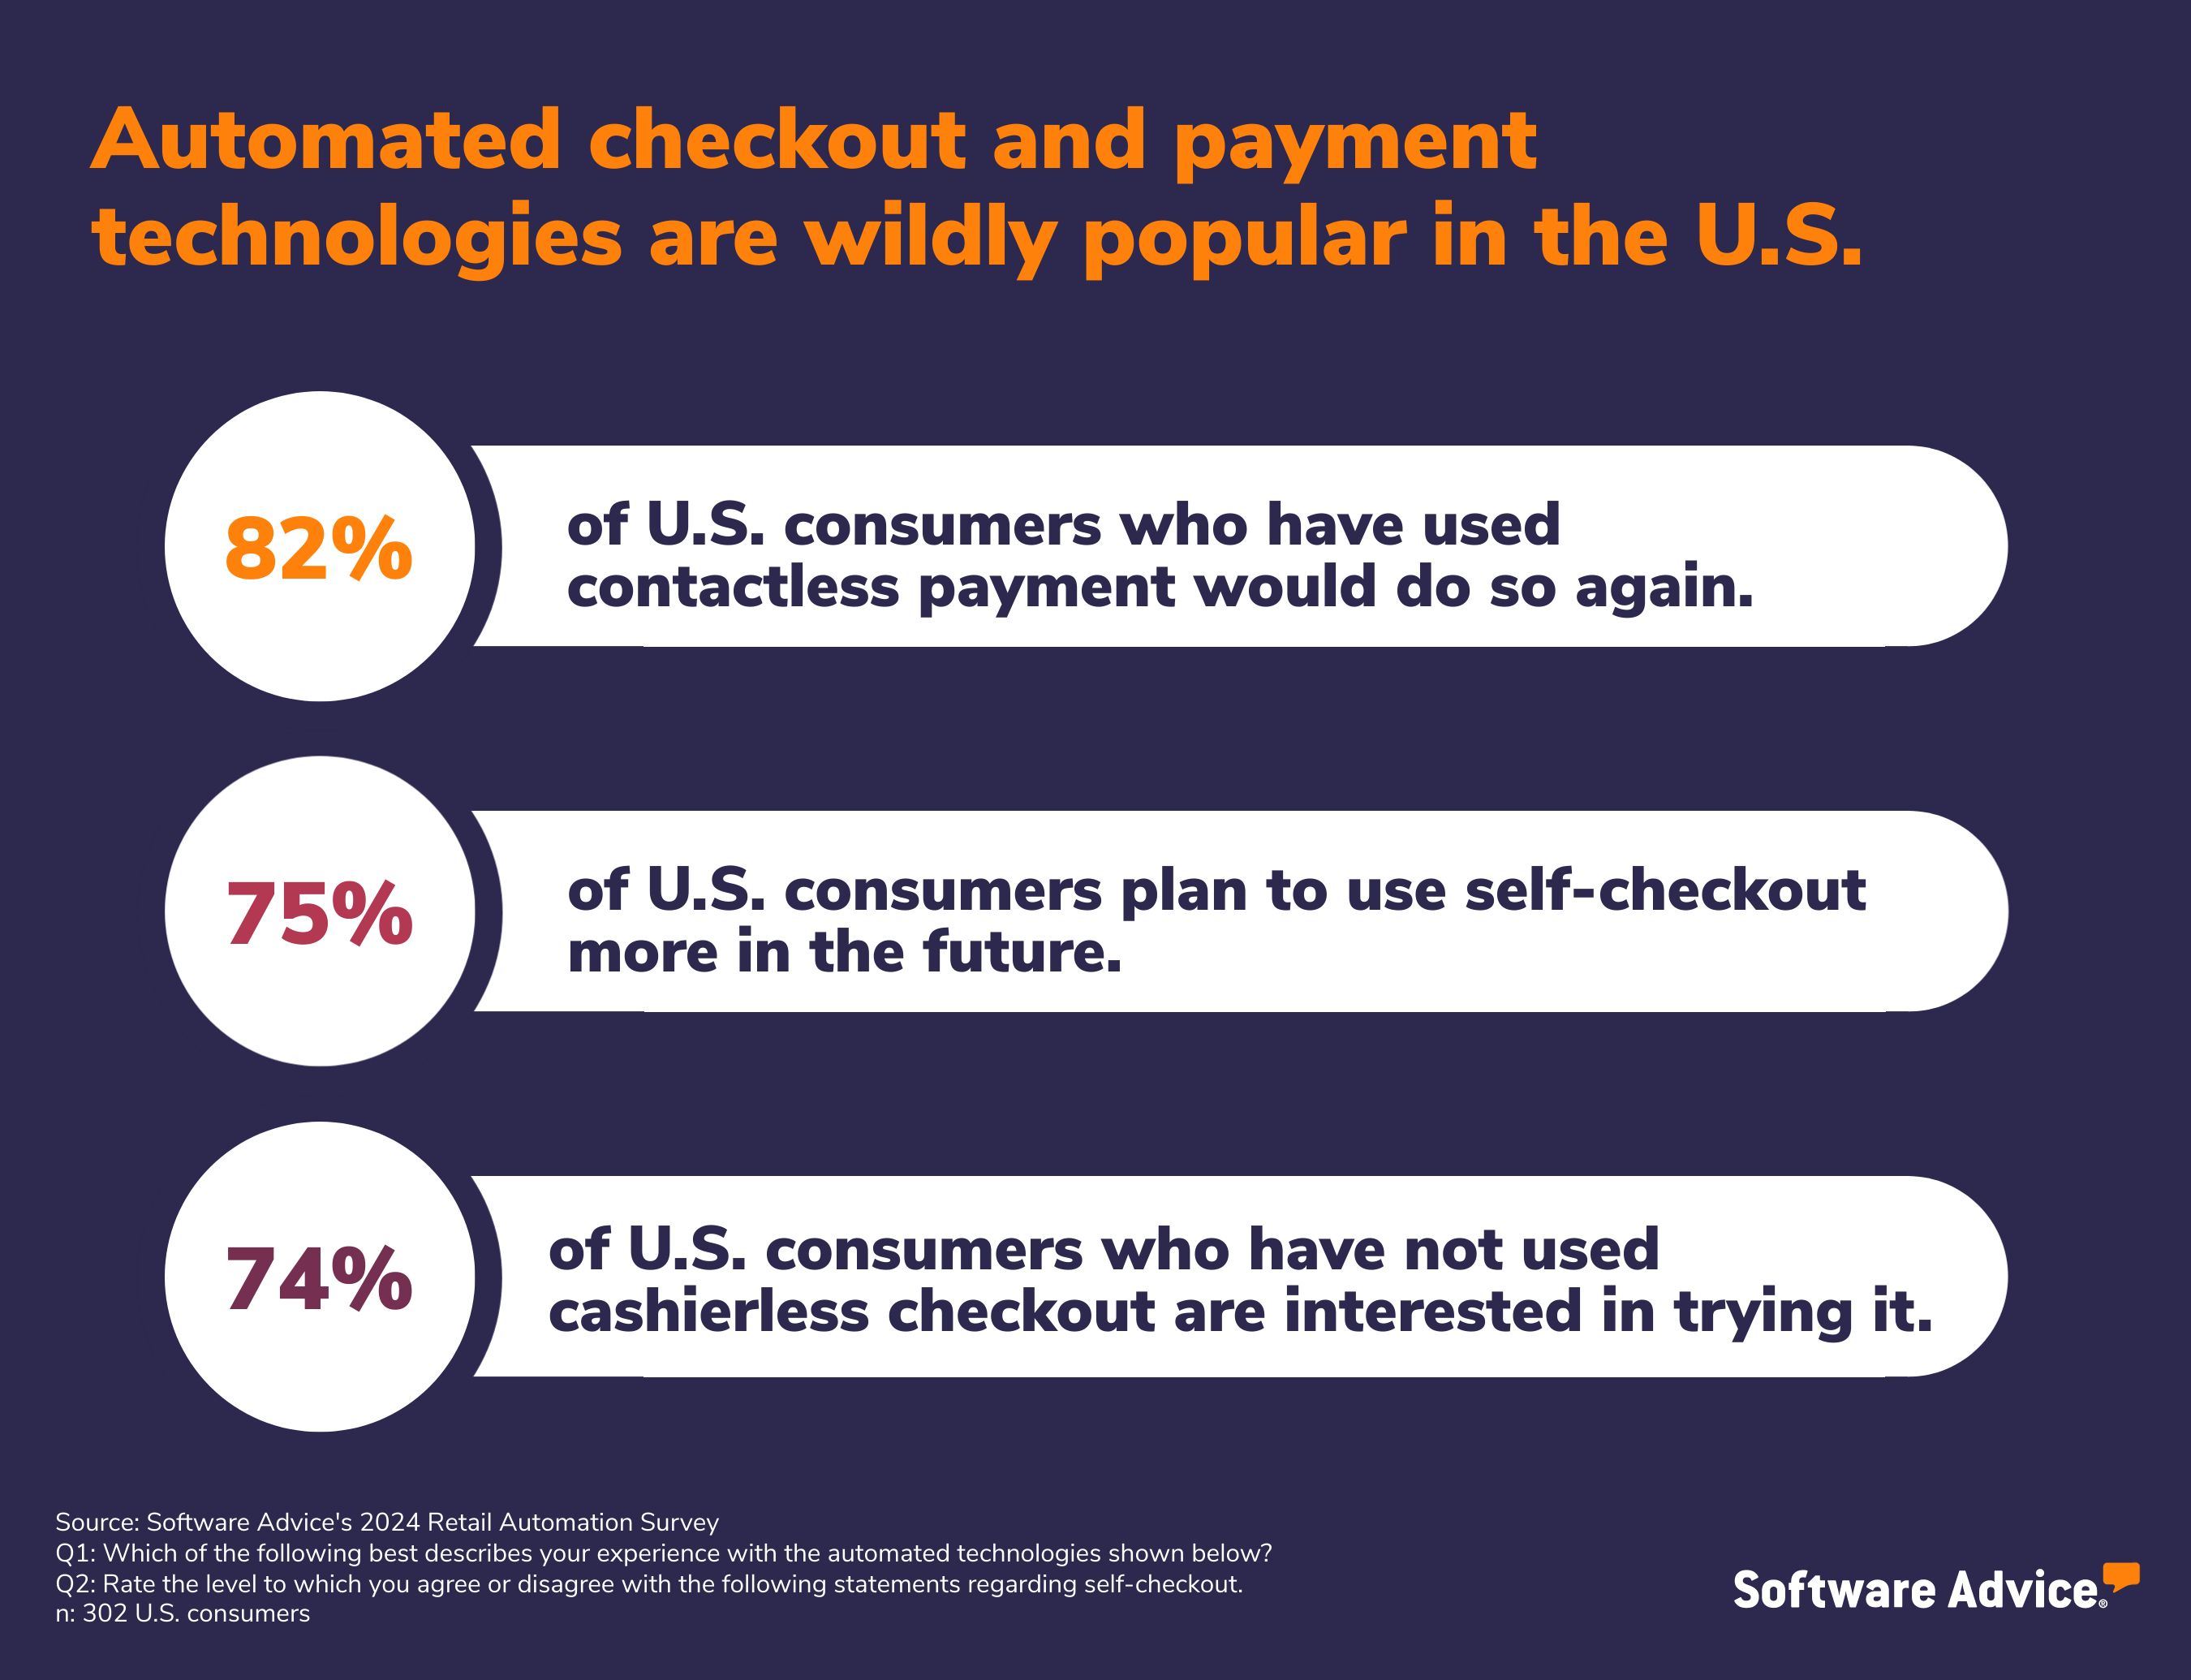 SA graphic depicting stats about automated checkout and payment technologies that are wildly popular in the U.S.